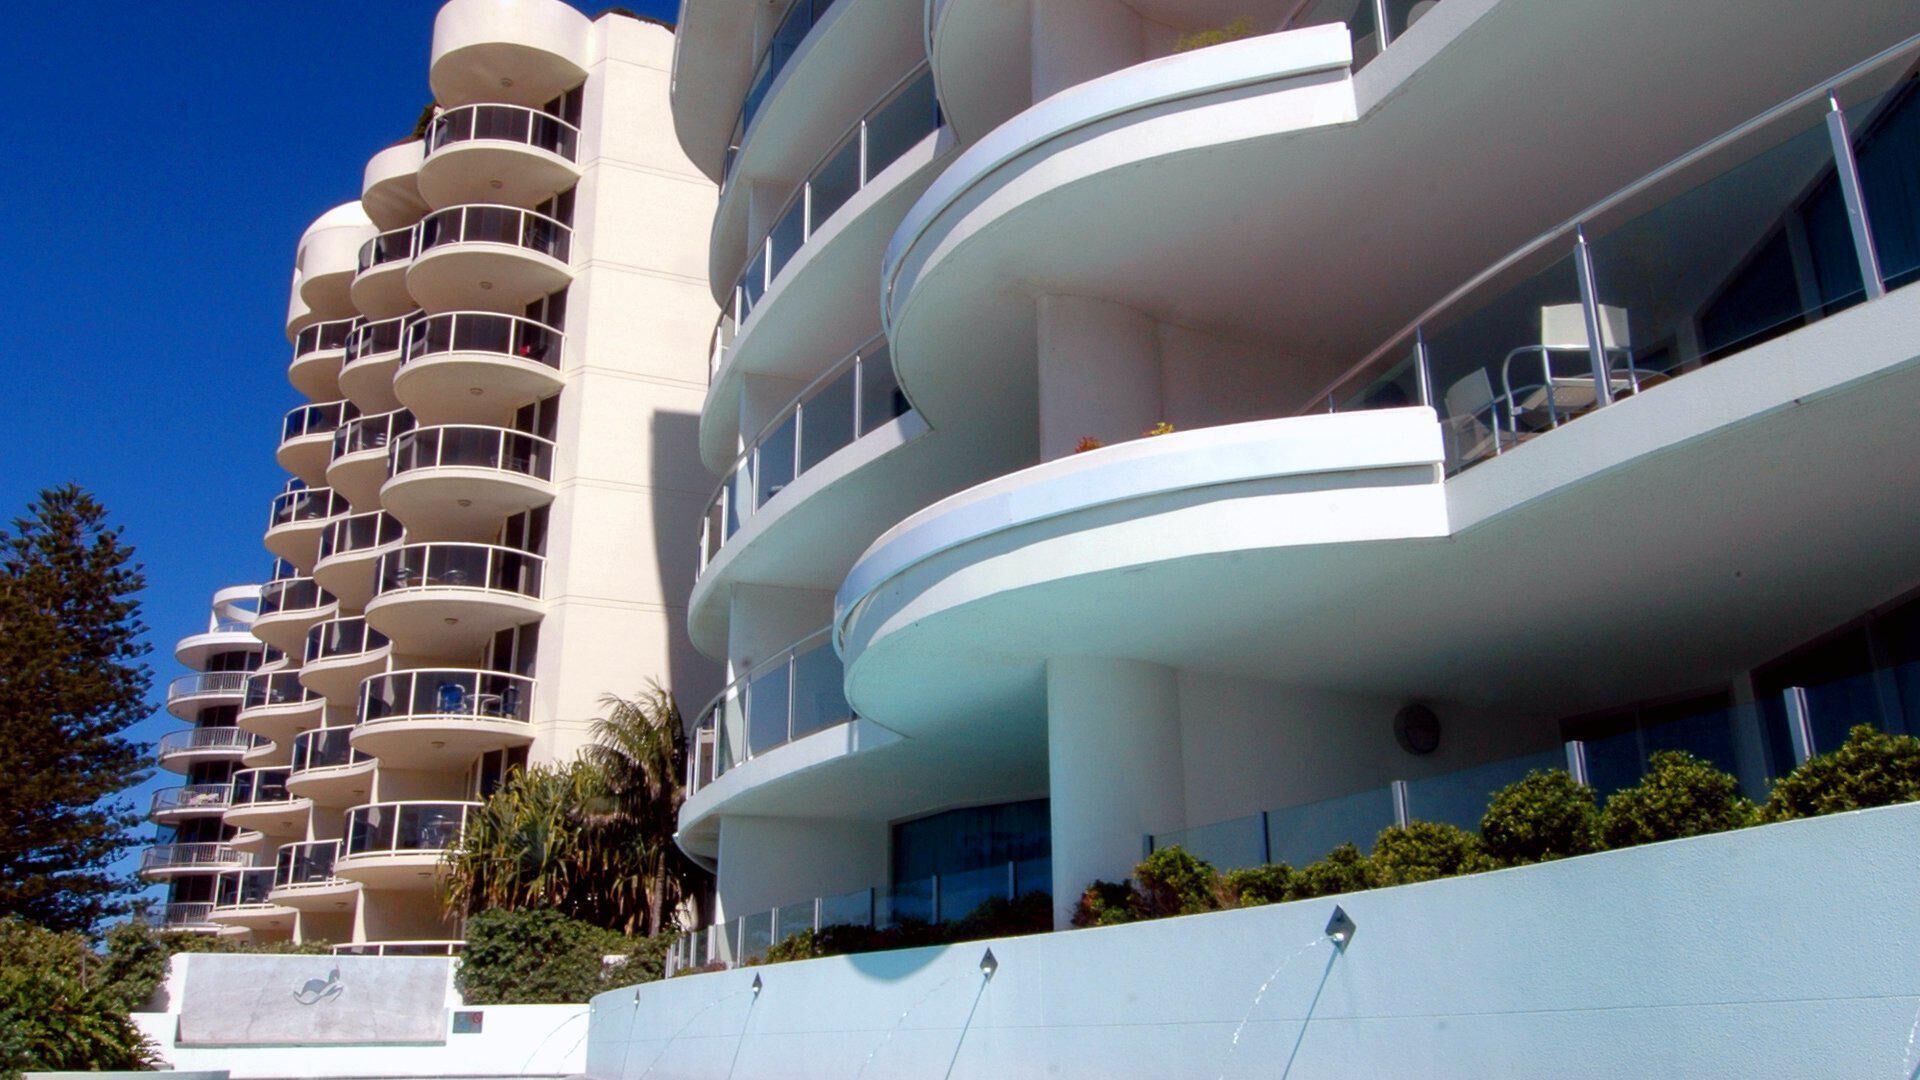 Sirocco 201 - Large Five Bedroom Apartment in Sirocco Resort with Private Balcony and BBQ!